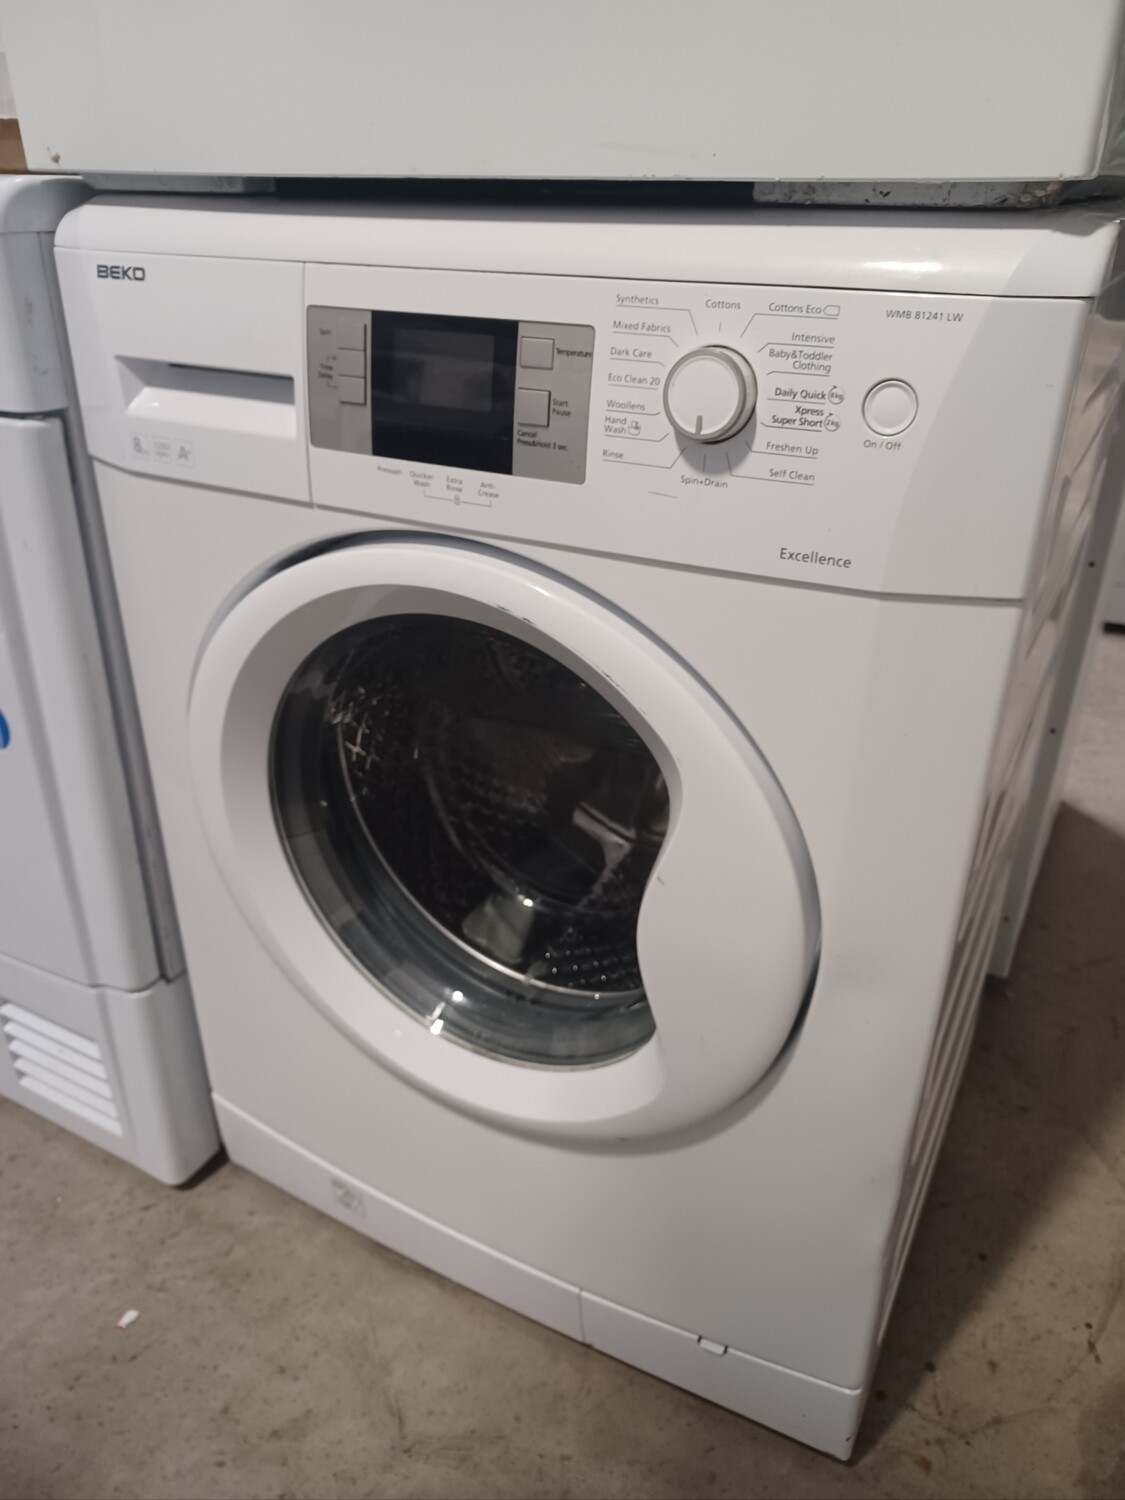 Beko WMB81243LW A+++ 8kg Load 1200 Spin Washing Machine White Item Located In The Whitby Shop